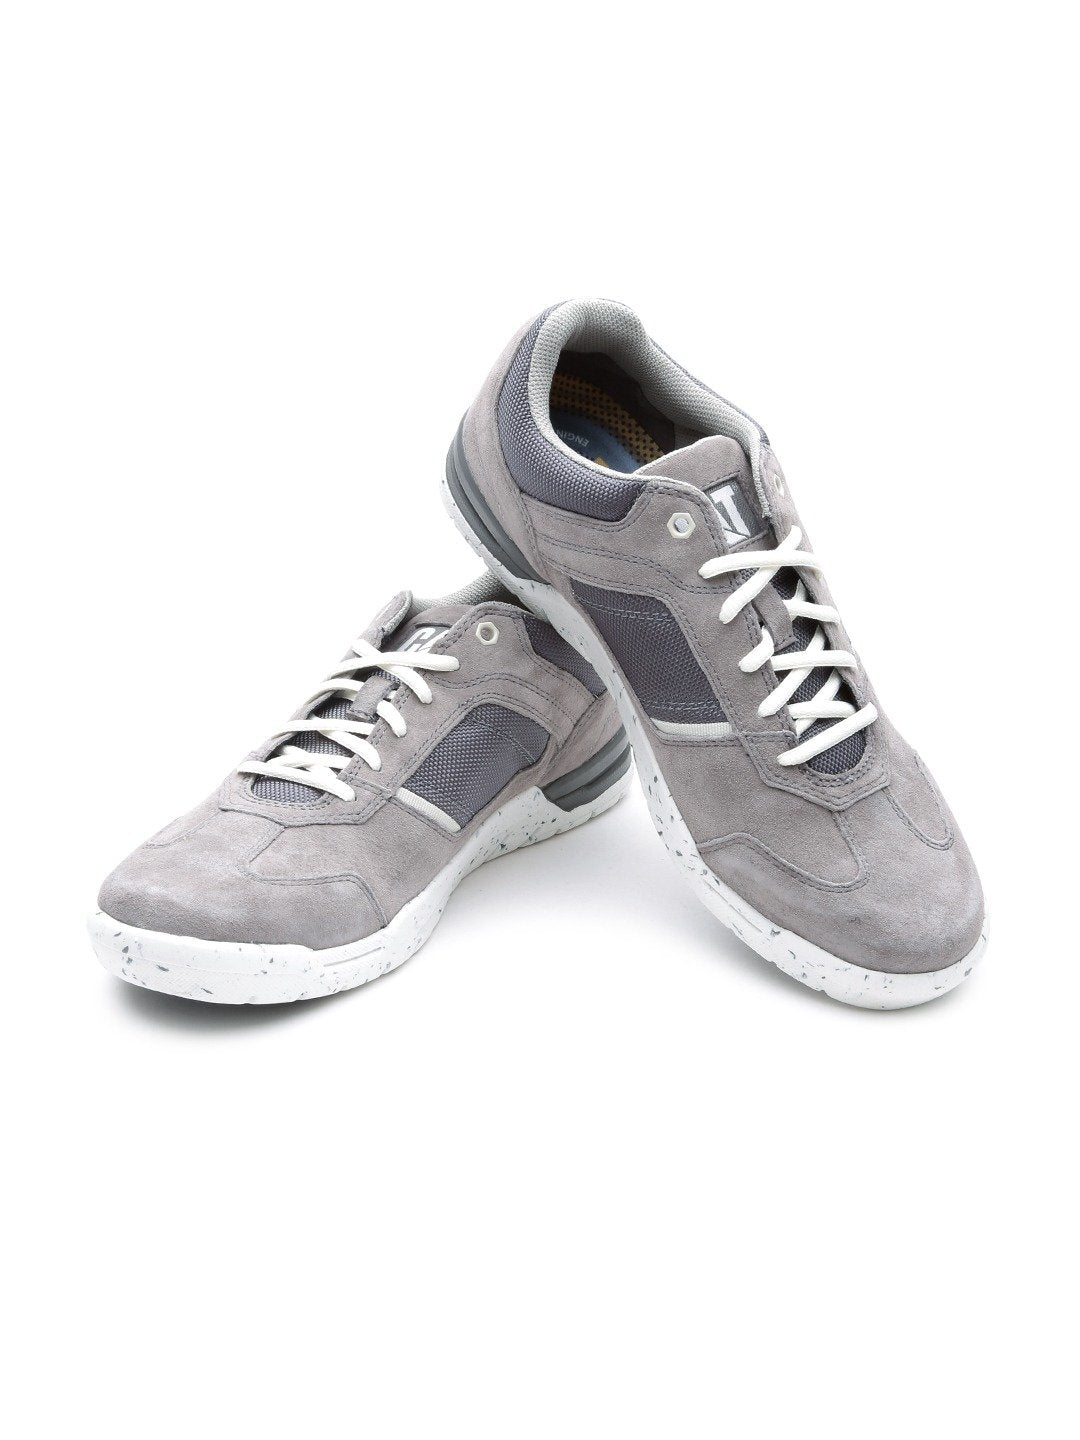 Men Grey Chasm Wolverine Leather Sneakers - Discount Store